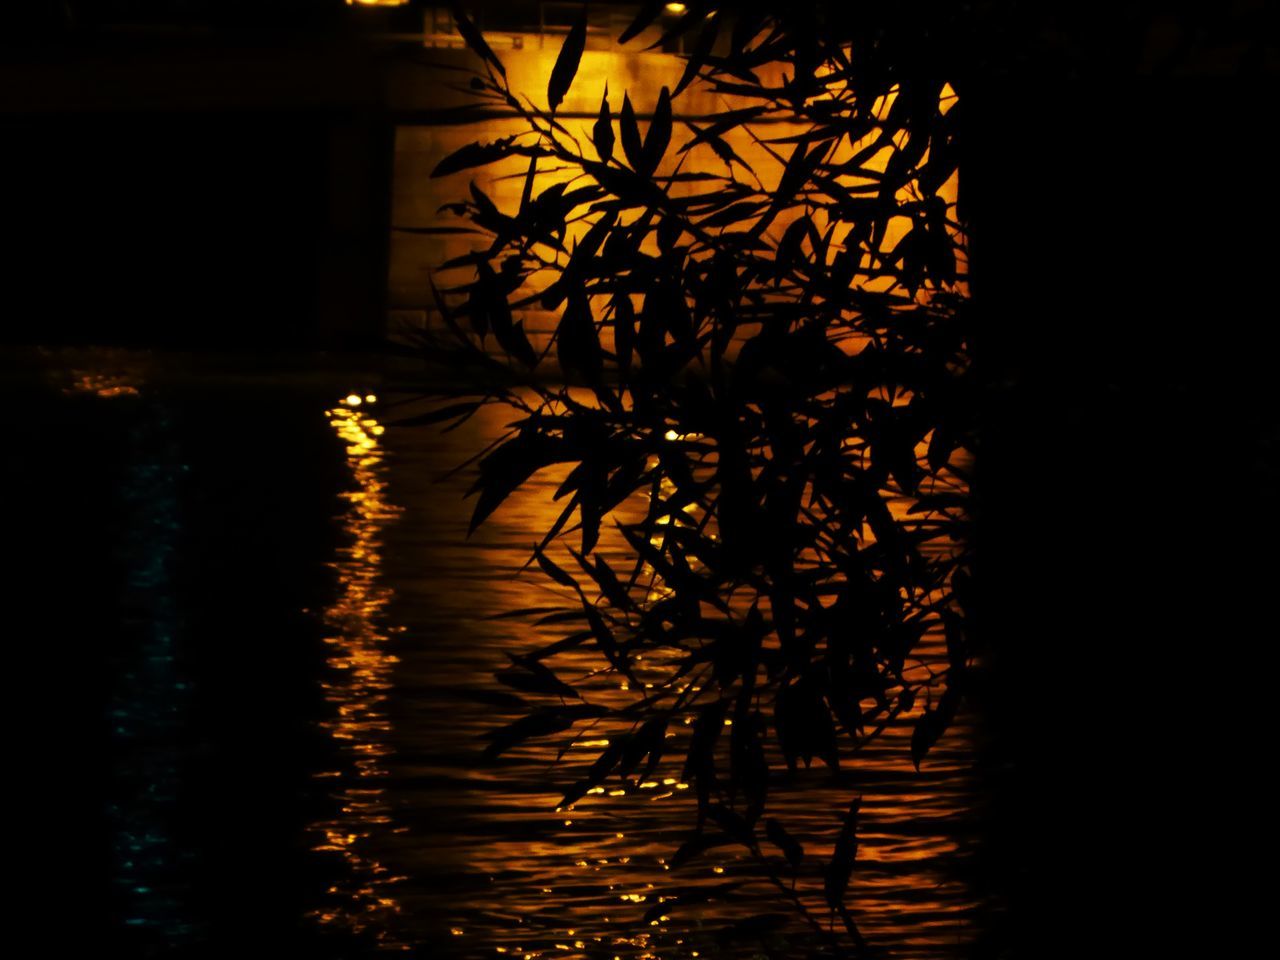 SILHOUETTE PLANT BY LAKE AT NIGHT